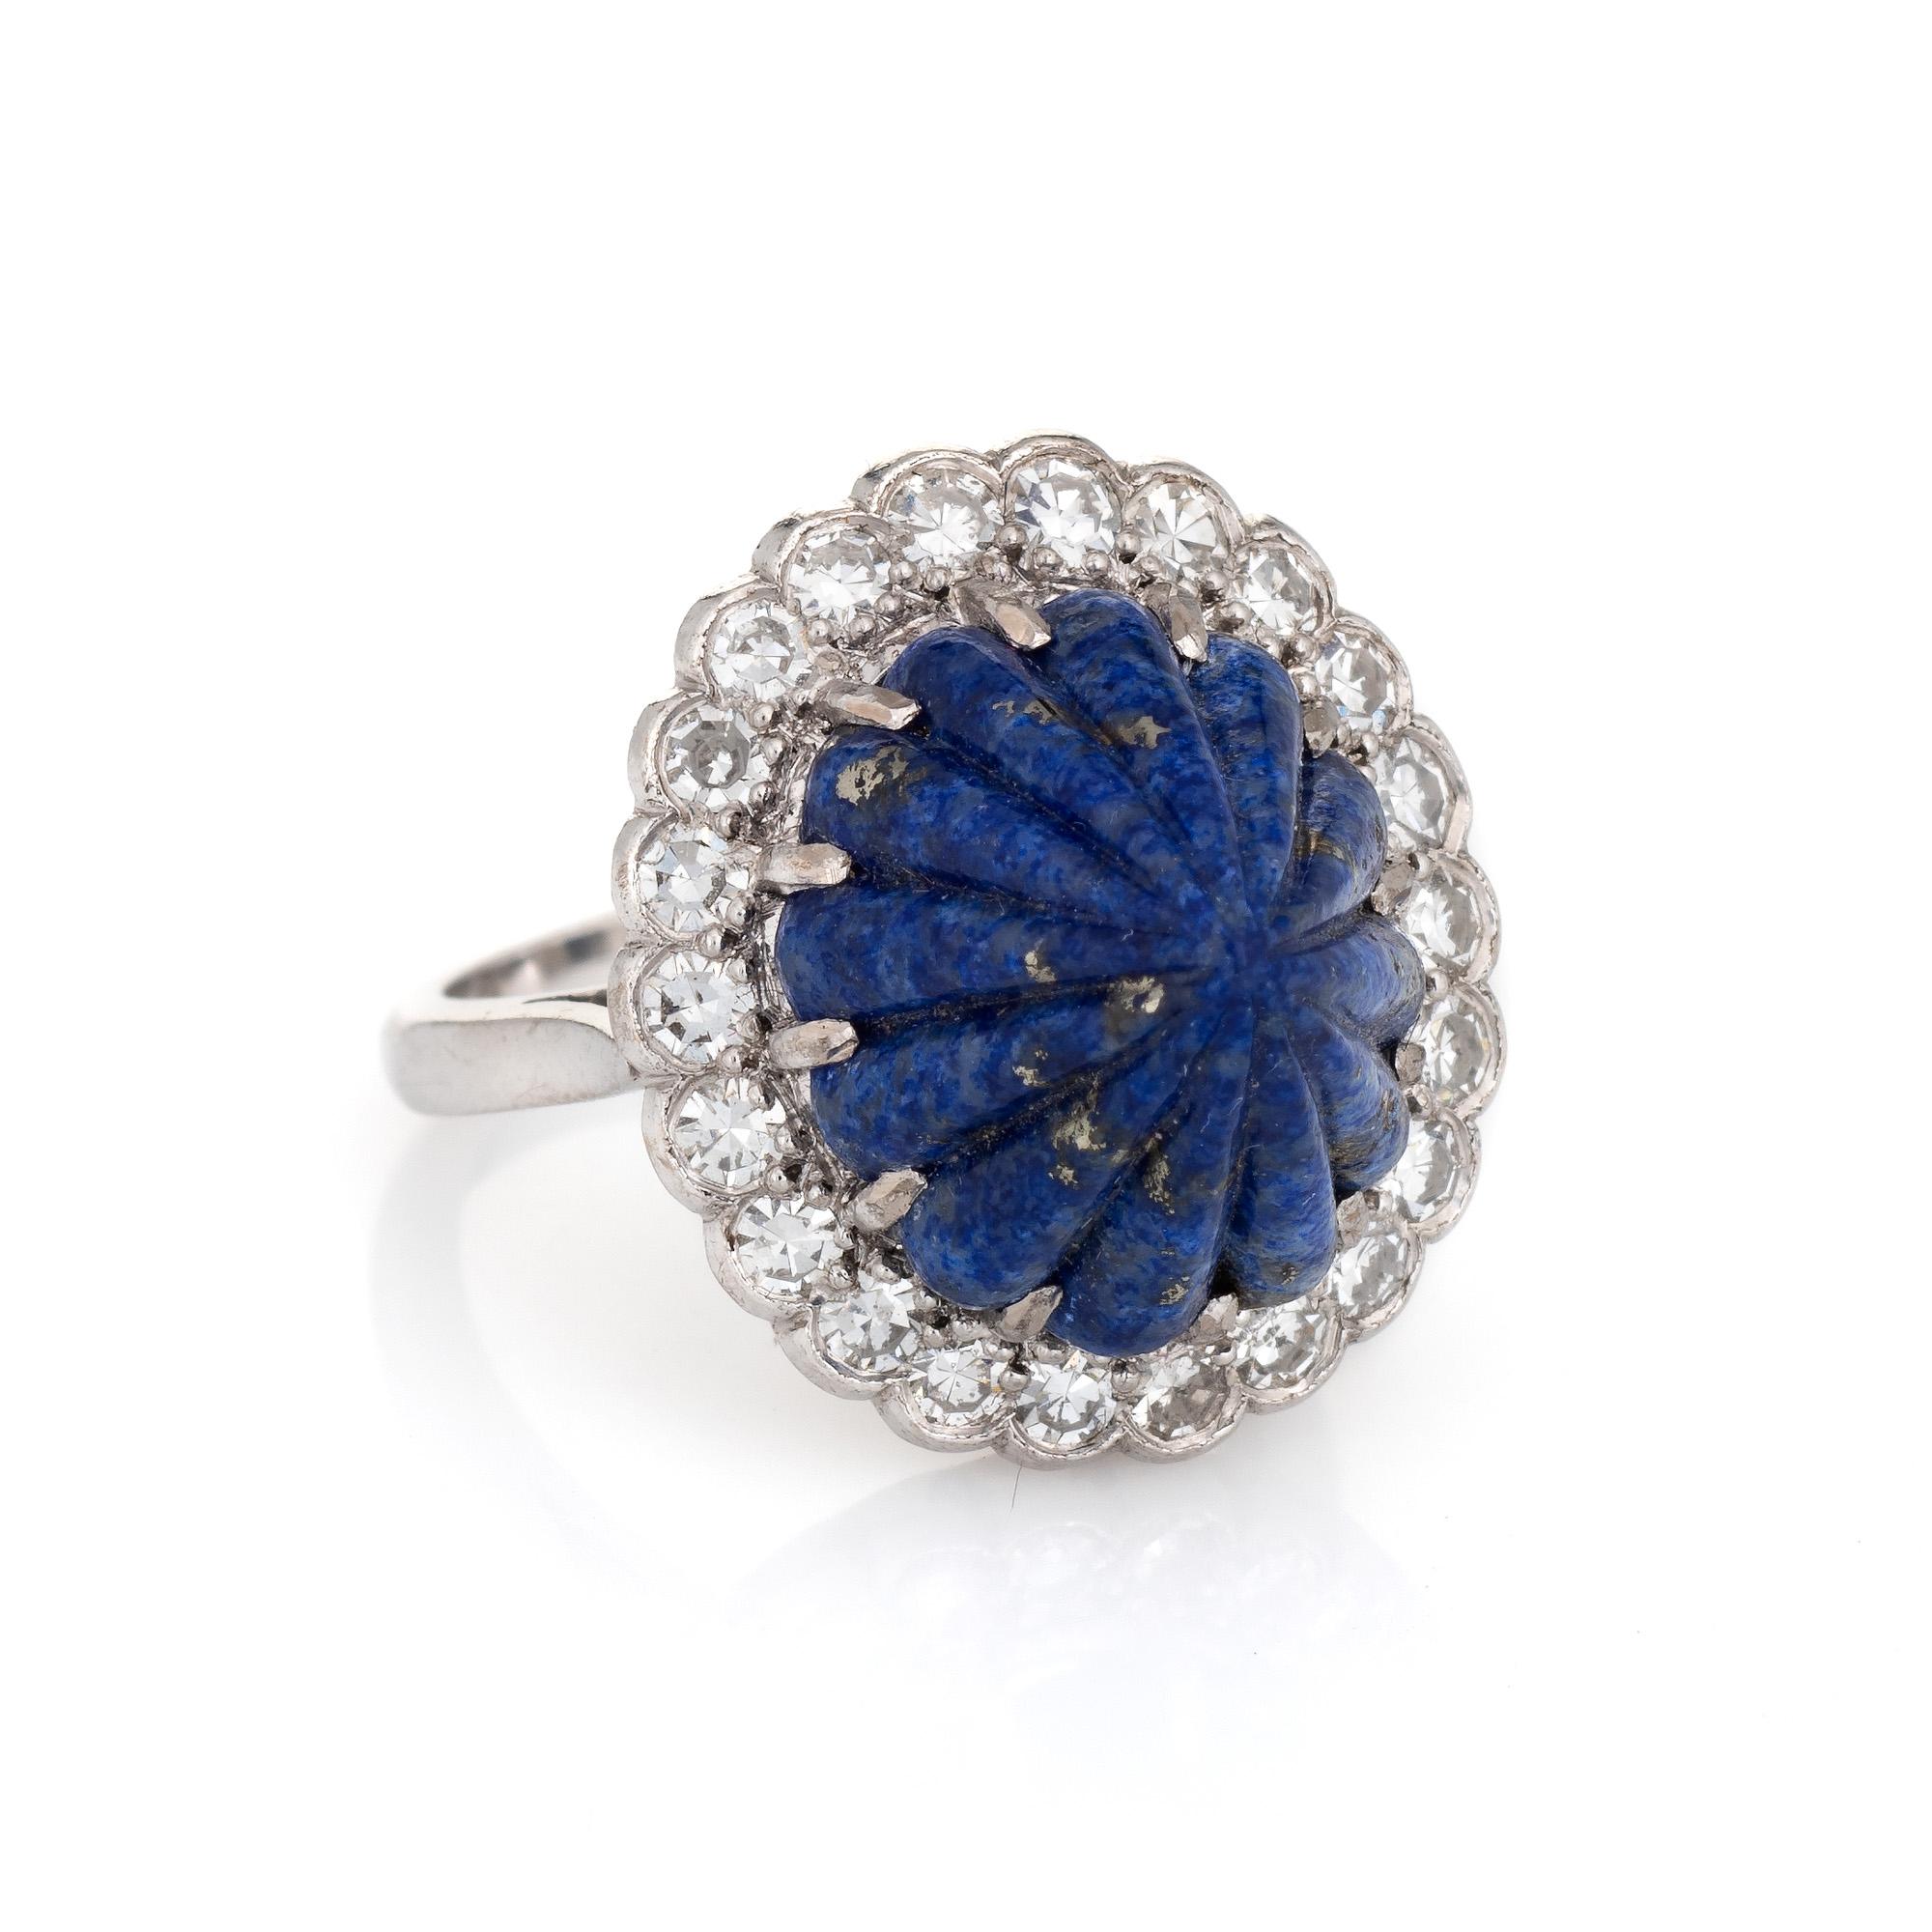 Stylish vintage fluted lapis lazuli & diamond cocktail ring (circa 1950s to 1960s) crafted in 18 karat white gold. 

Fluted lapis lazuli measures 14mm x 12mm, accented with an estimated 1 carat of diamonds (estimated at H-I color and VS2-SI2